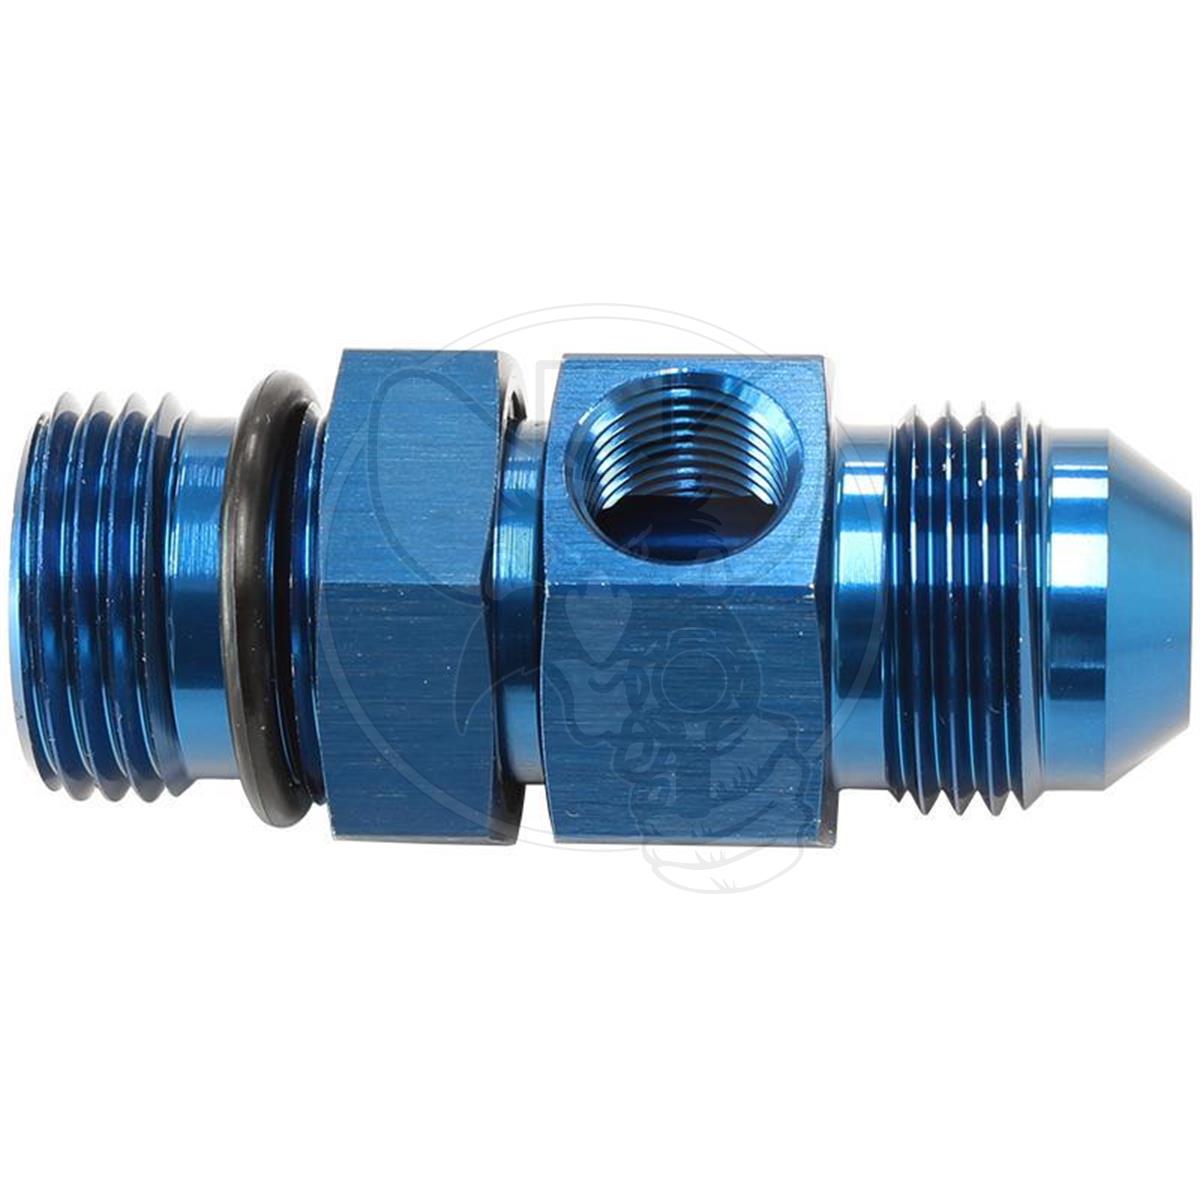 Aeroflow -10 ORB to -10AN Extension with 1/8" Port - Blue